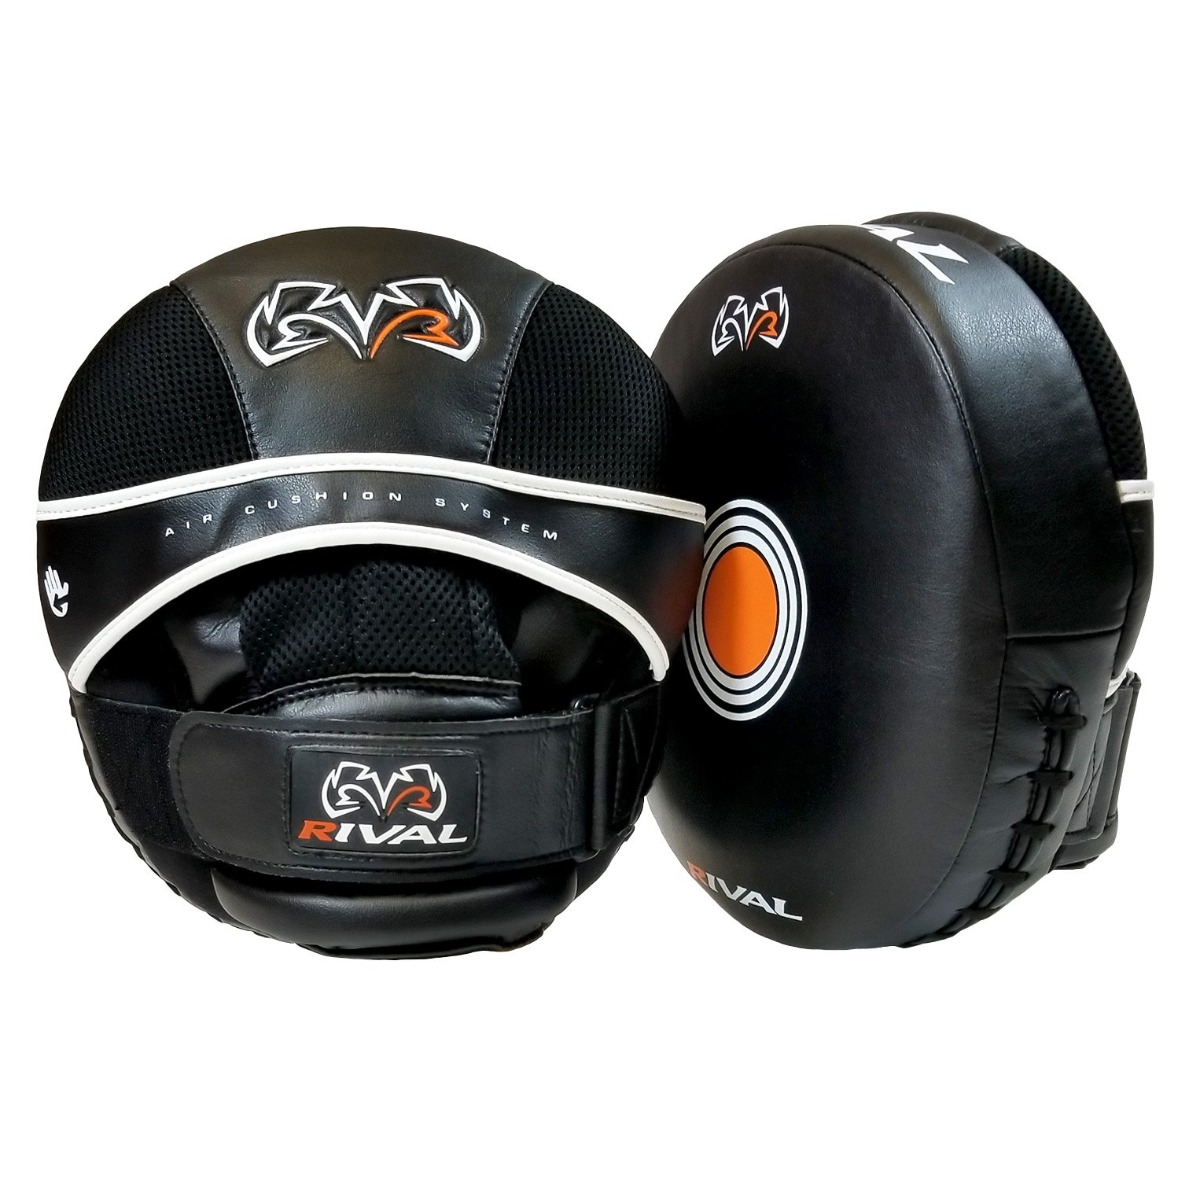 RIVAL RPM3 AIR PUNCH MITTS 2.0-0